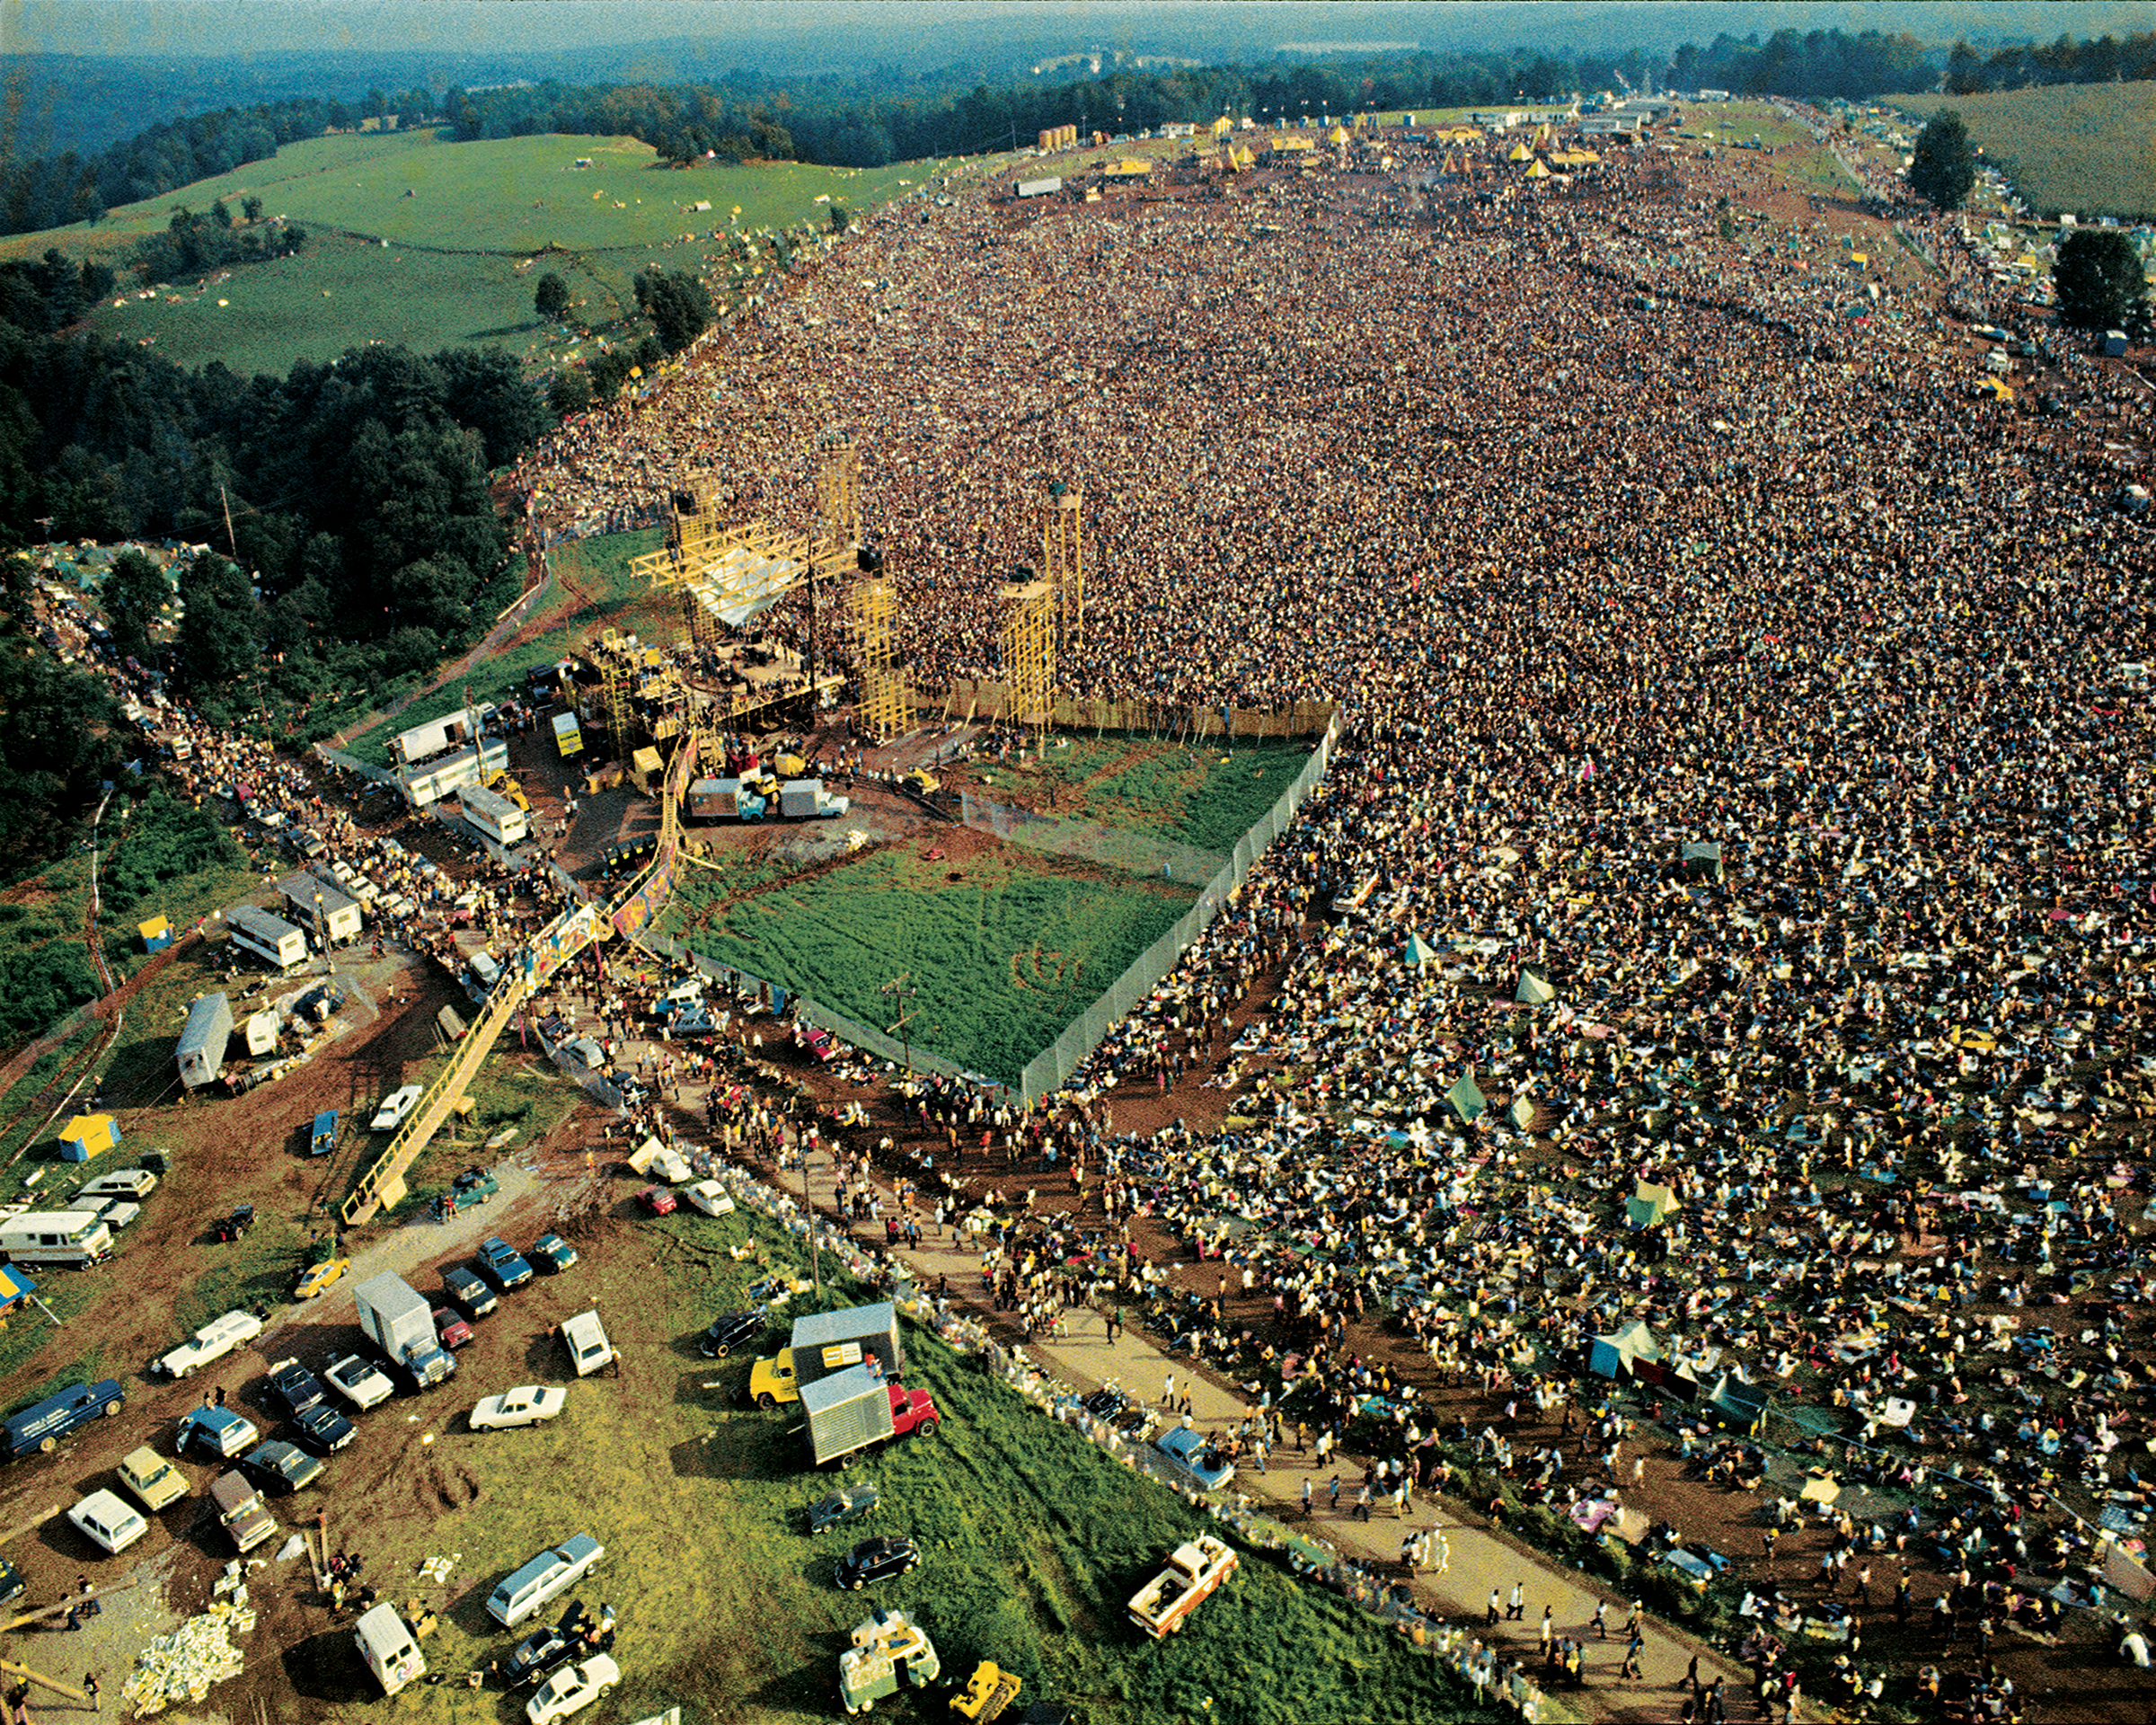 Aerial view taken from a helicopter of the stage and the five hundred thousand strong crowd gathered at the Woodstock Music and Arts Fair in Bethel, New York, August 15 - 17 1969. (Barry Z Levine—Getty Images)